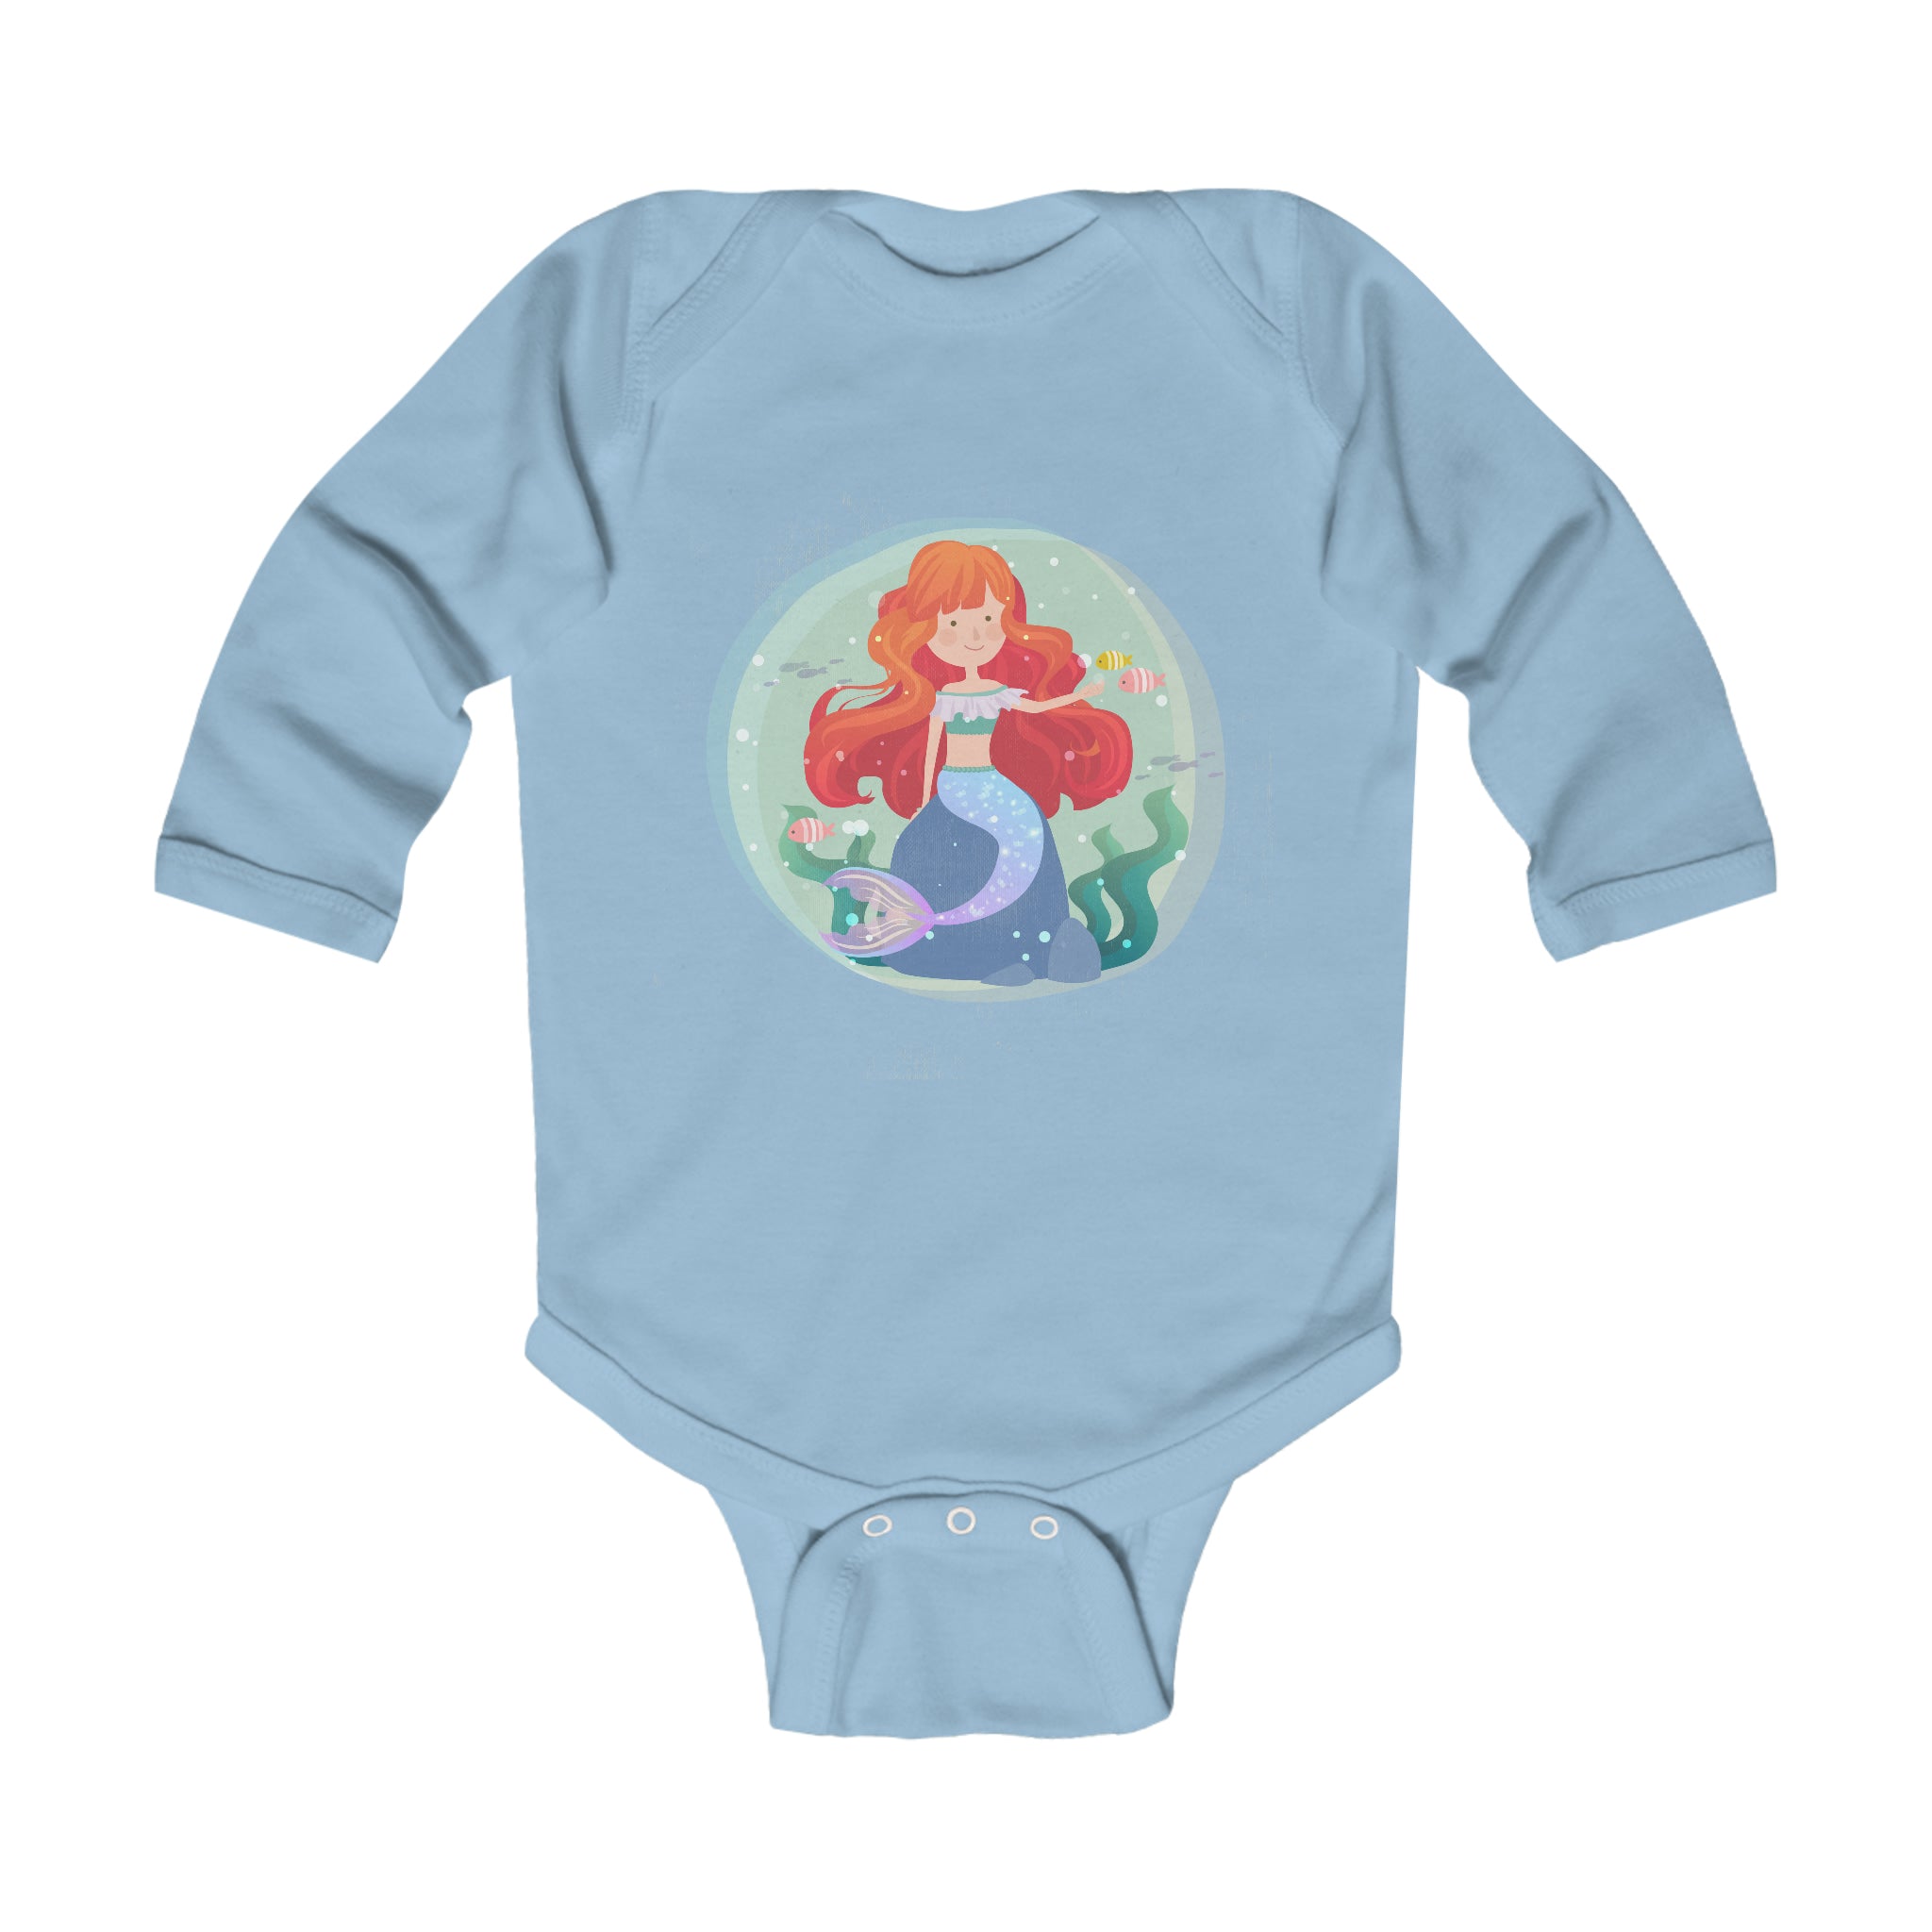 Baby Long Sleeve Bodysuit, Adorable Mermaid Graphic, Fun Baby Clothes